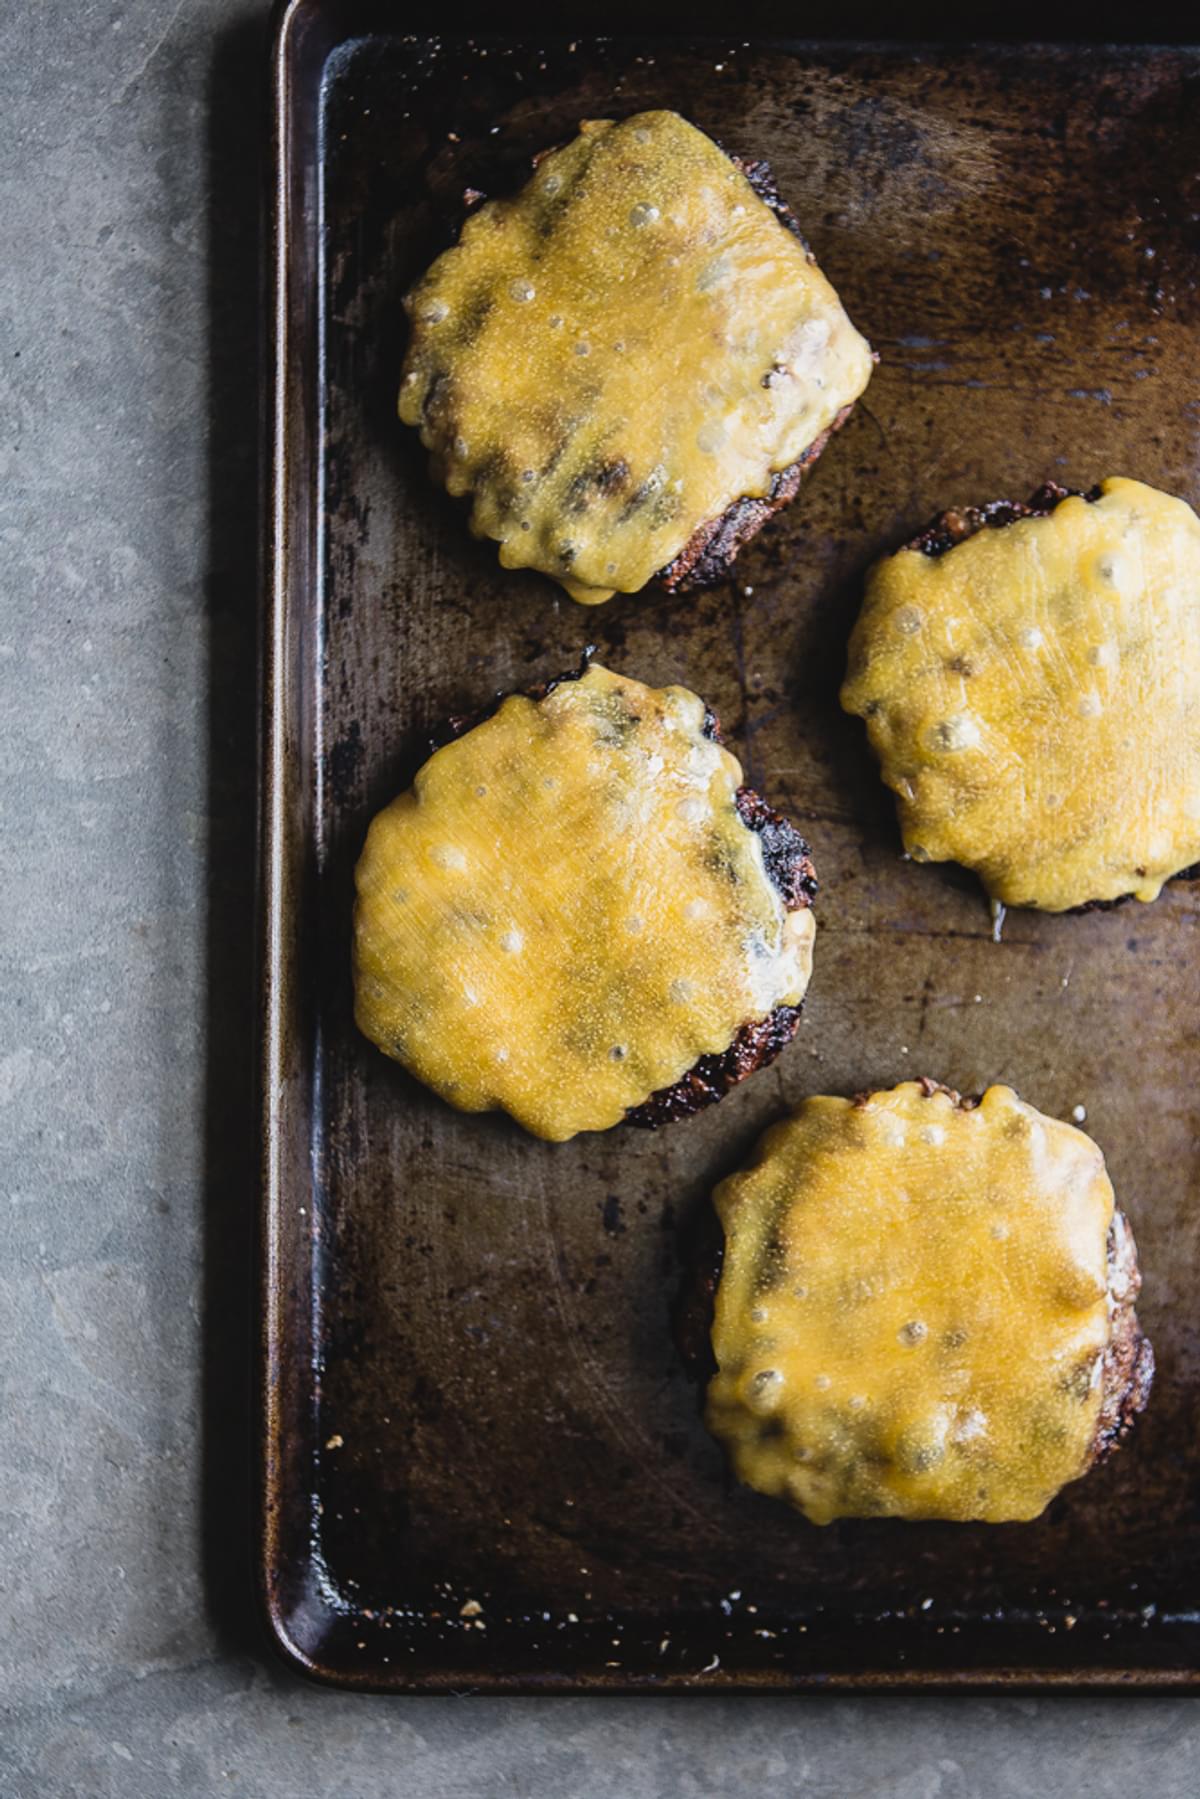 4 cooked beef patties on a baking sheet topped with melted cheddar cheese